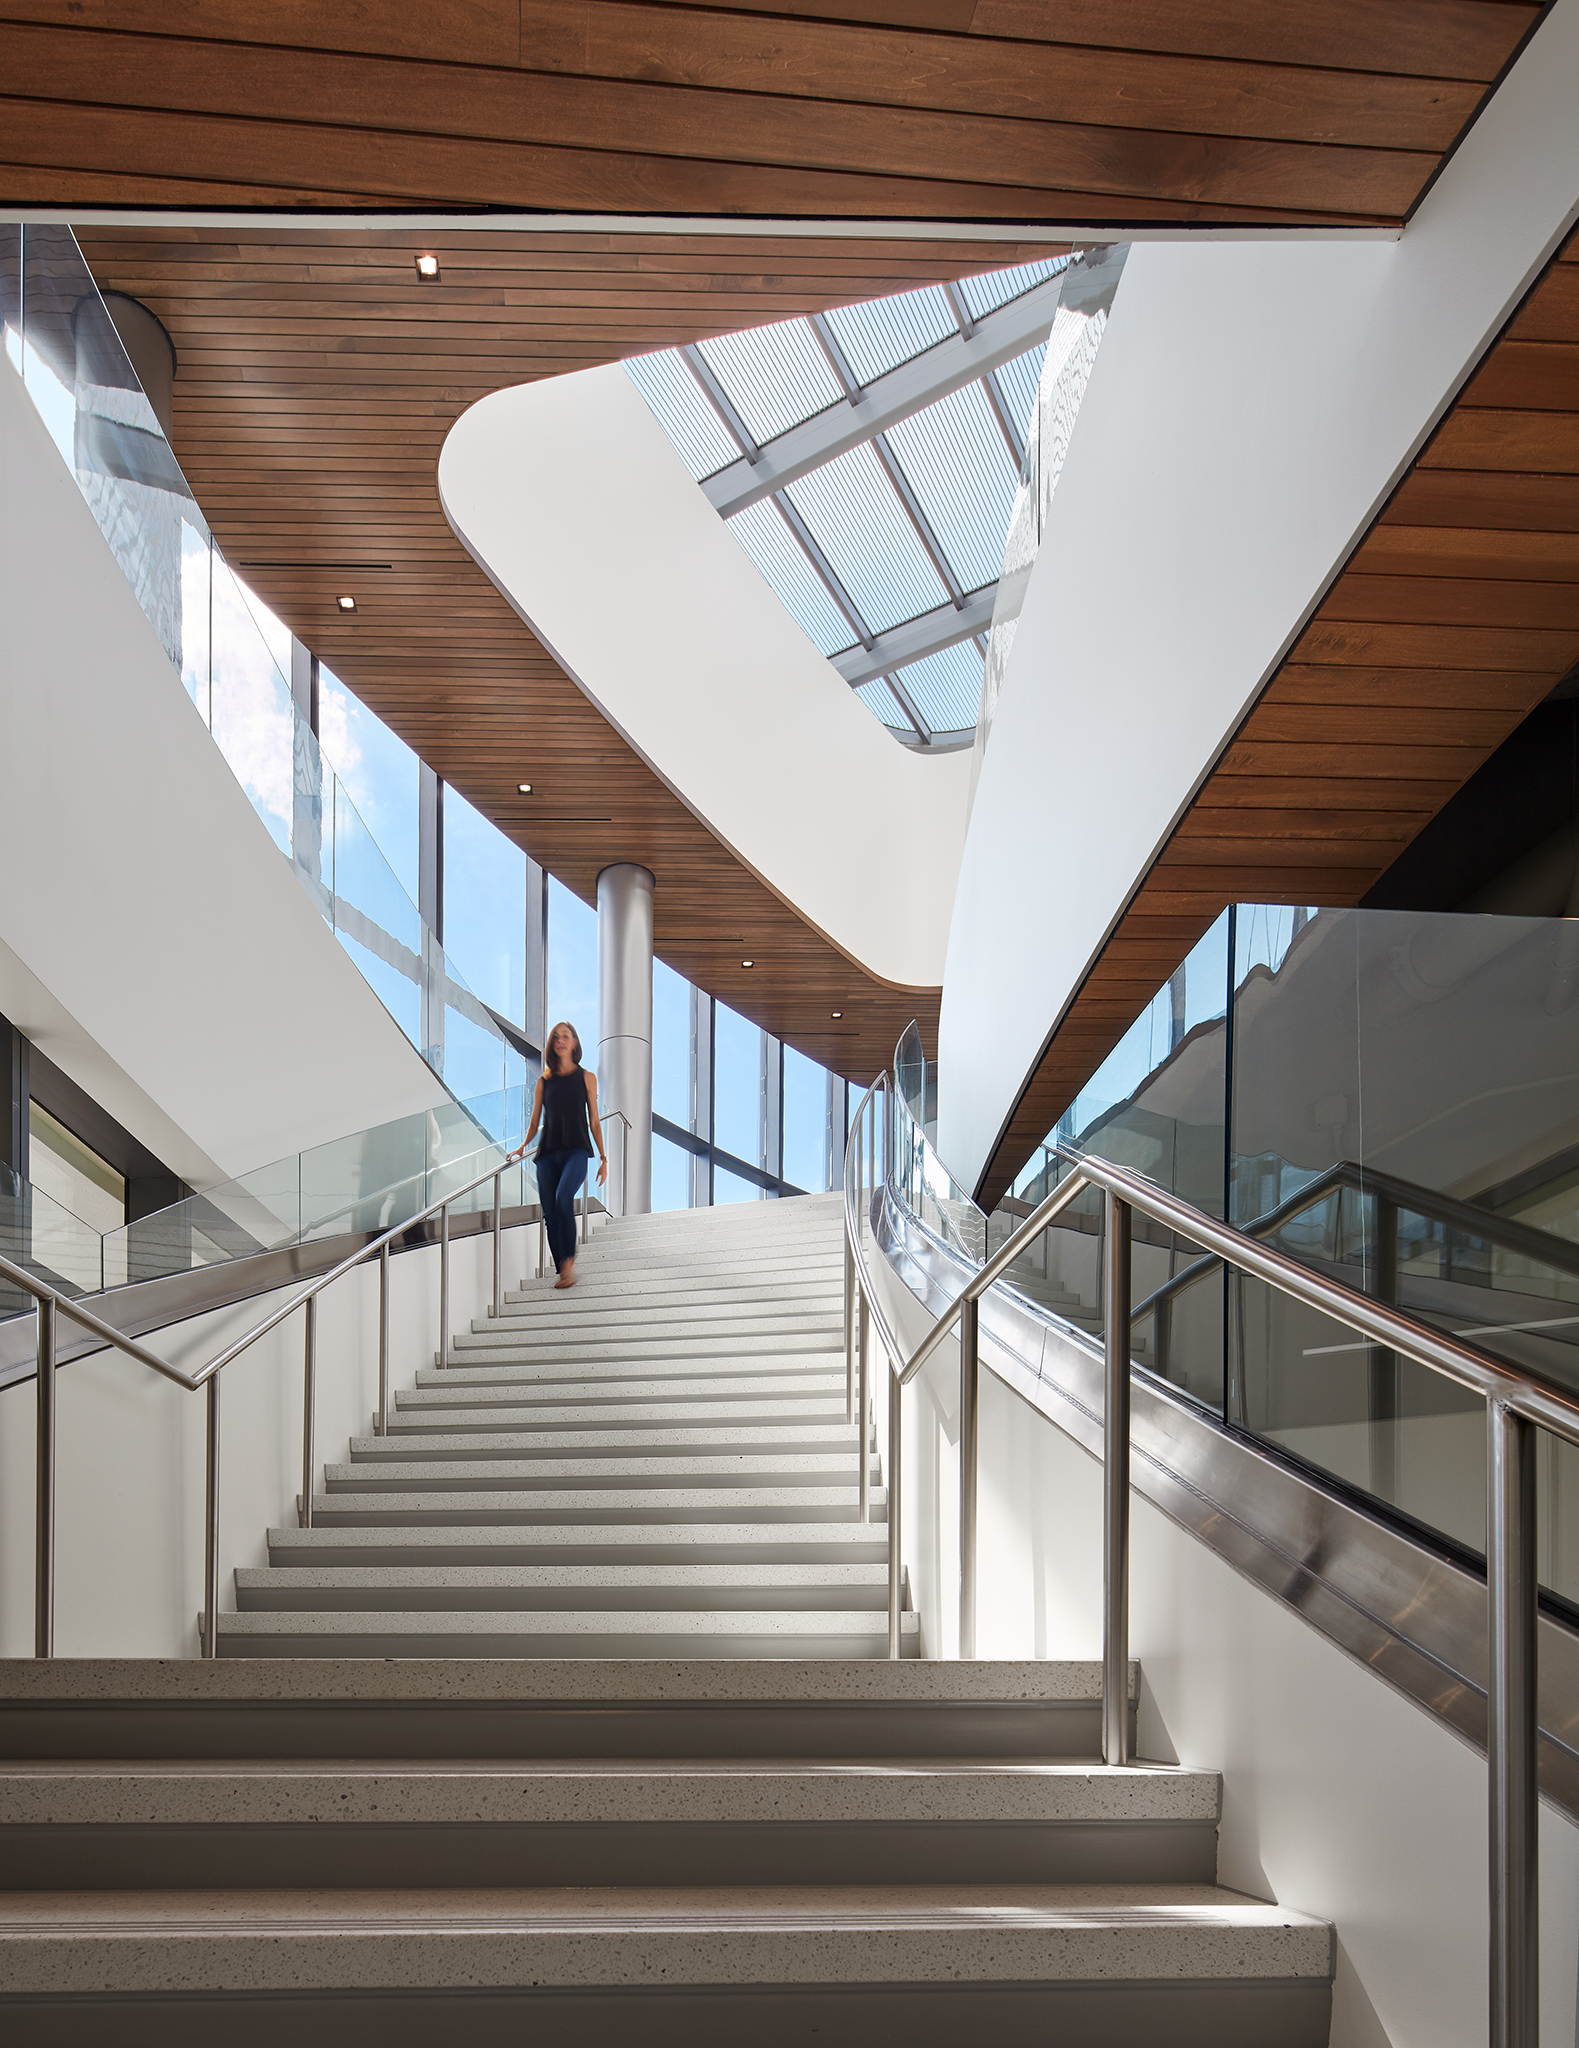 Staircase at SCB's Academic and Residential Complex. Architecture. Campus Environments. Learning Environments. Student Residential.